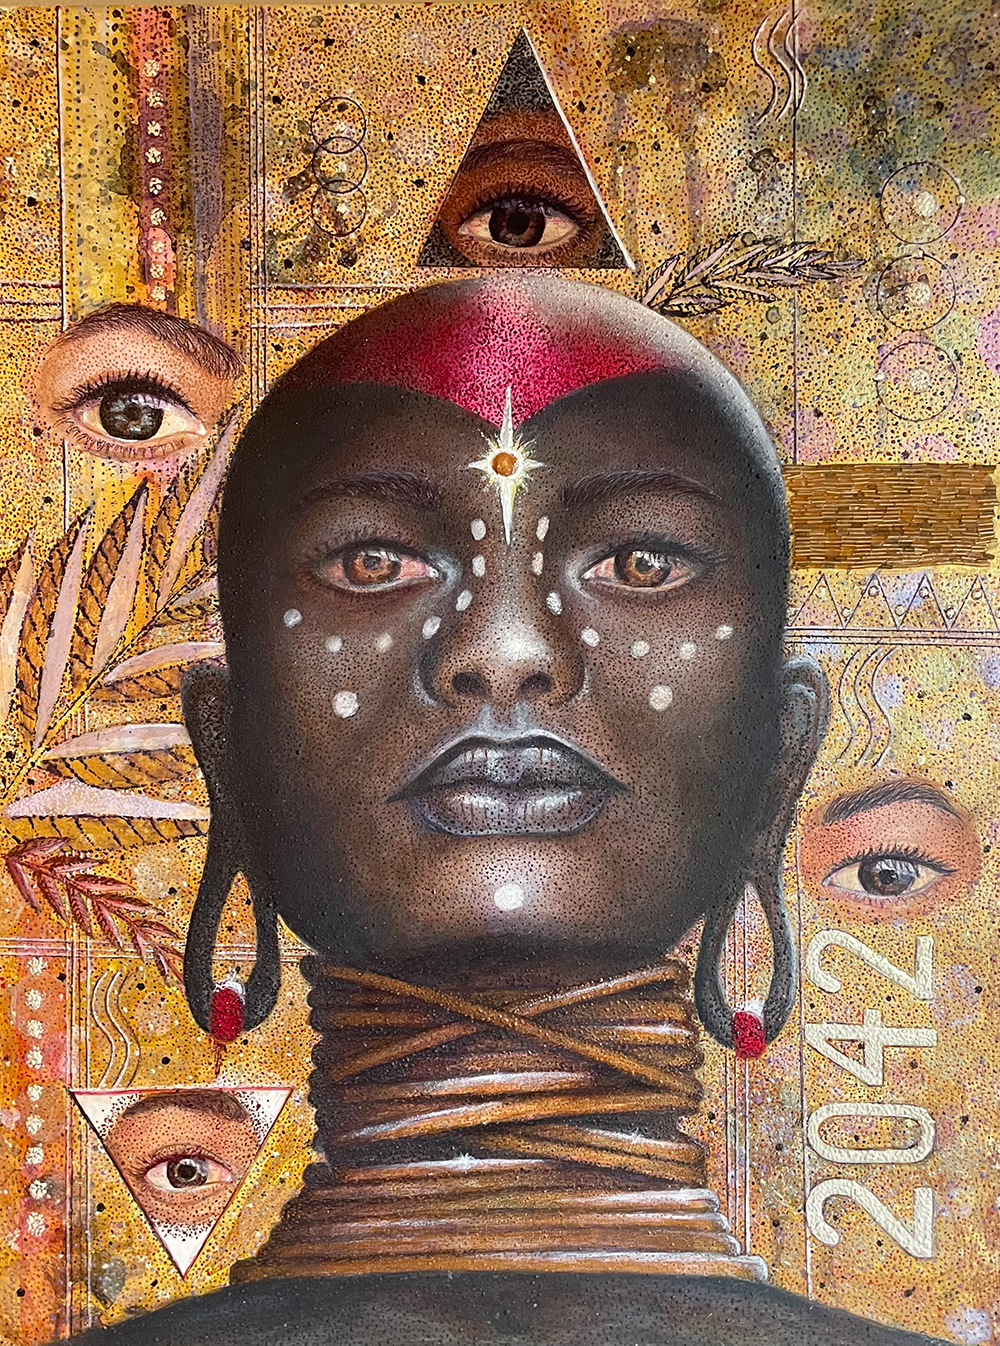 An acrylic painting of a bald Black woman wearing a neck ring and red earrings in stretched earlobes. The top of her head is painted red, she has a white star painted between her eyebrows and white circles painted between and underneath her eyes. The background is gold, and it is abstract, with many overlapping textures and patterns, as well as depictions of four eyes at different locations. In the right bottom quadrant, the number “2042” runs sideways up the drawing.